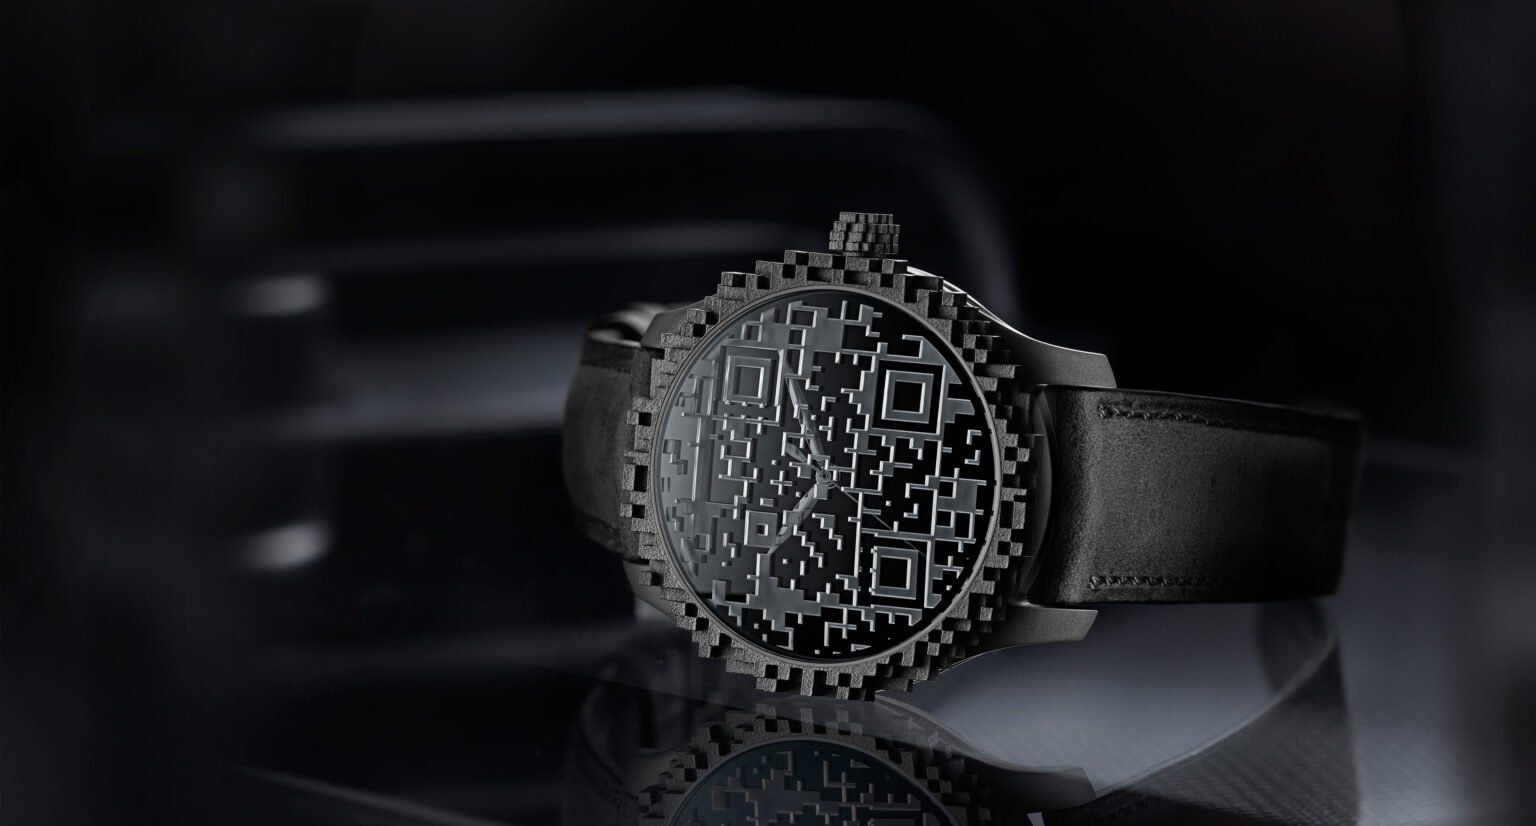 H. Moser & Cie. Endeavor Center seconds Genesis with the pixelated 3D printed titanium bezel and crown. This concept piece combines physical watchmaking expertise with the digital and virtual worlds.